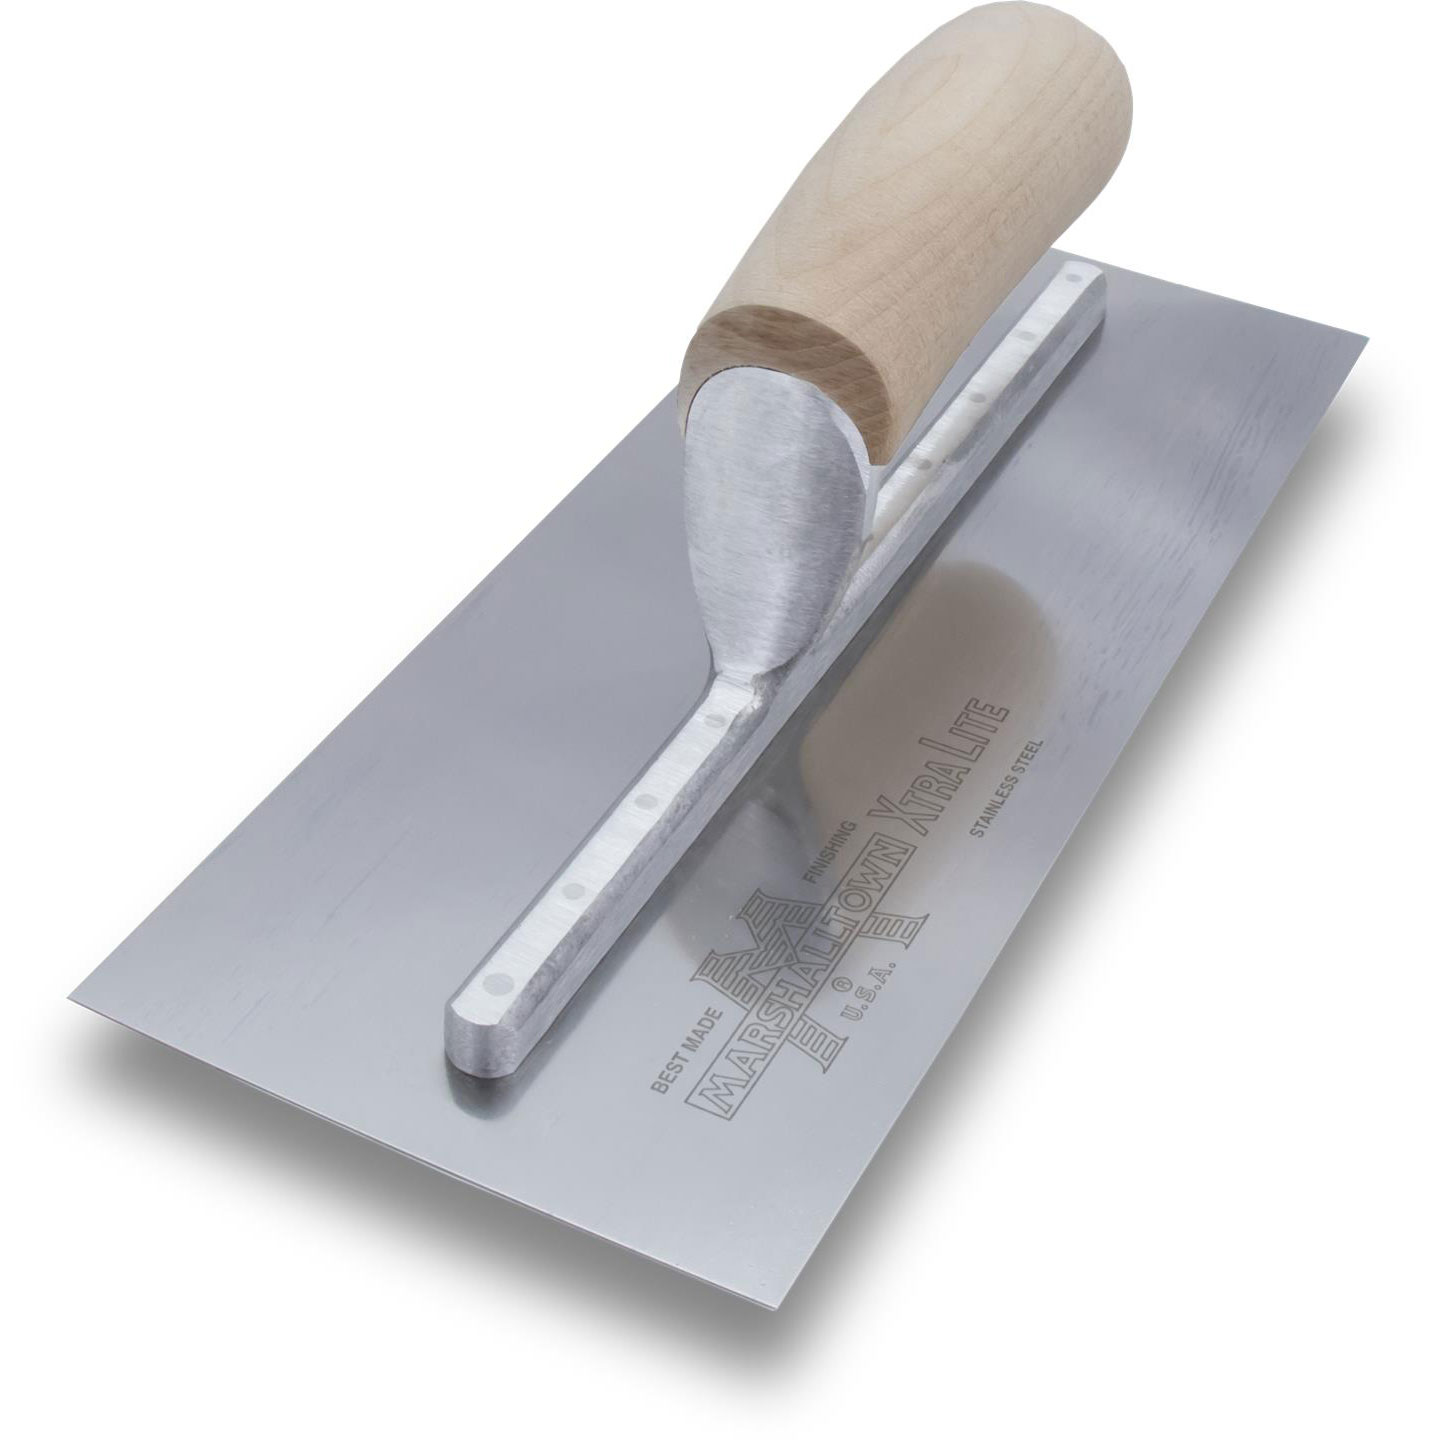 Marshalltown MXS91SS 10-1/2in x 4-1/2in Stainless Finishing Trowel with Curved Wood Handle MXS91SS